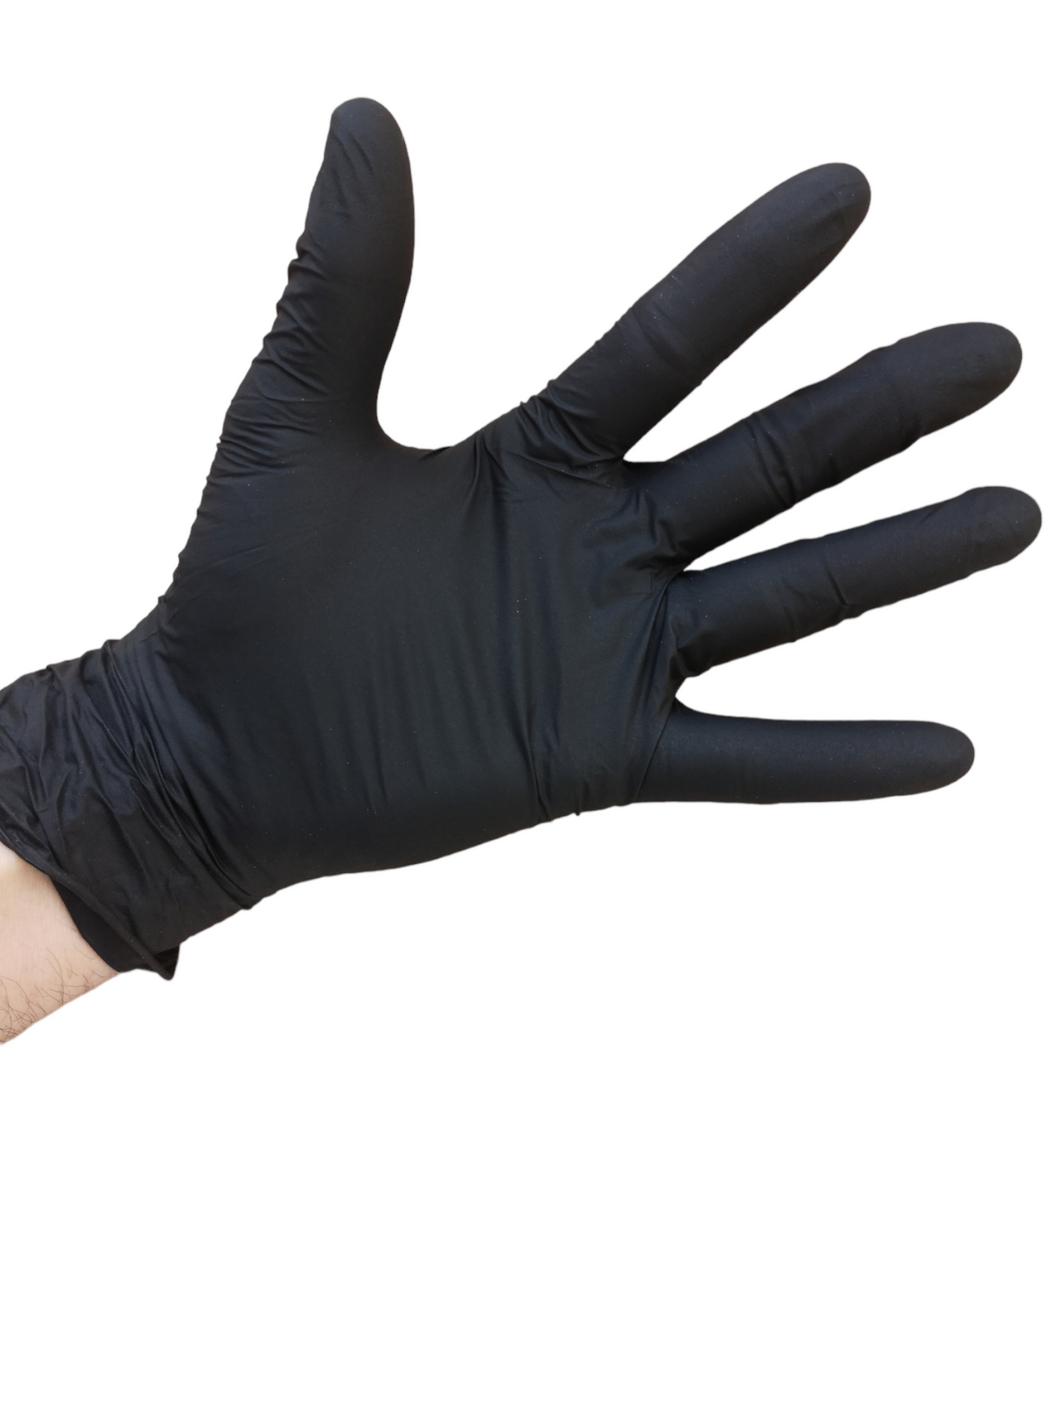 Black Nitrile Disposable Gloves (from as low as £4.99 per pack)